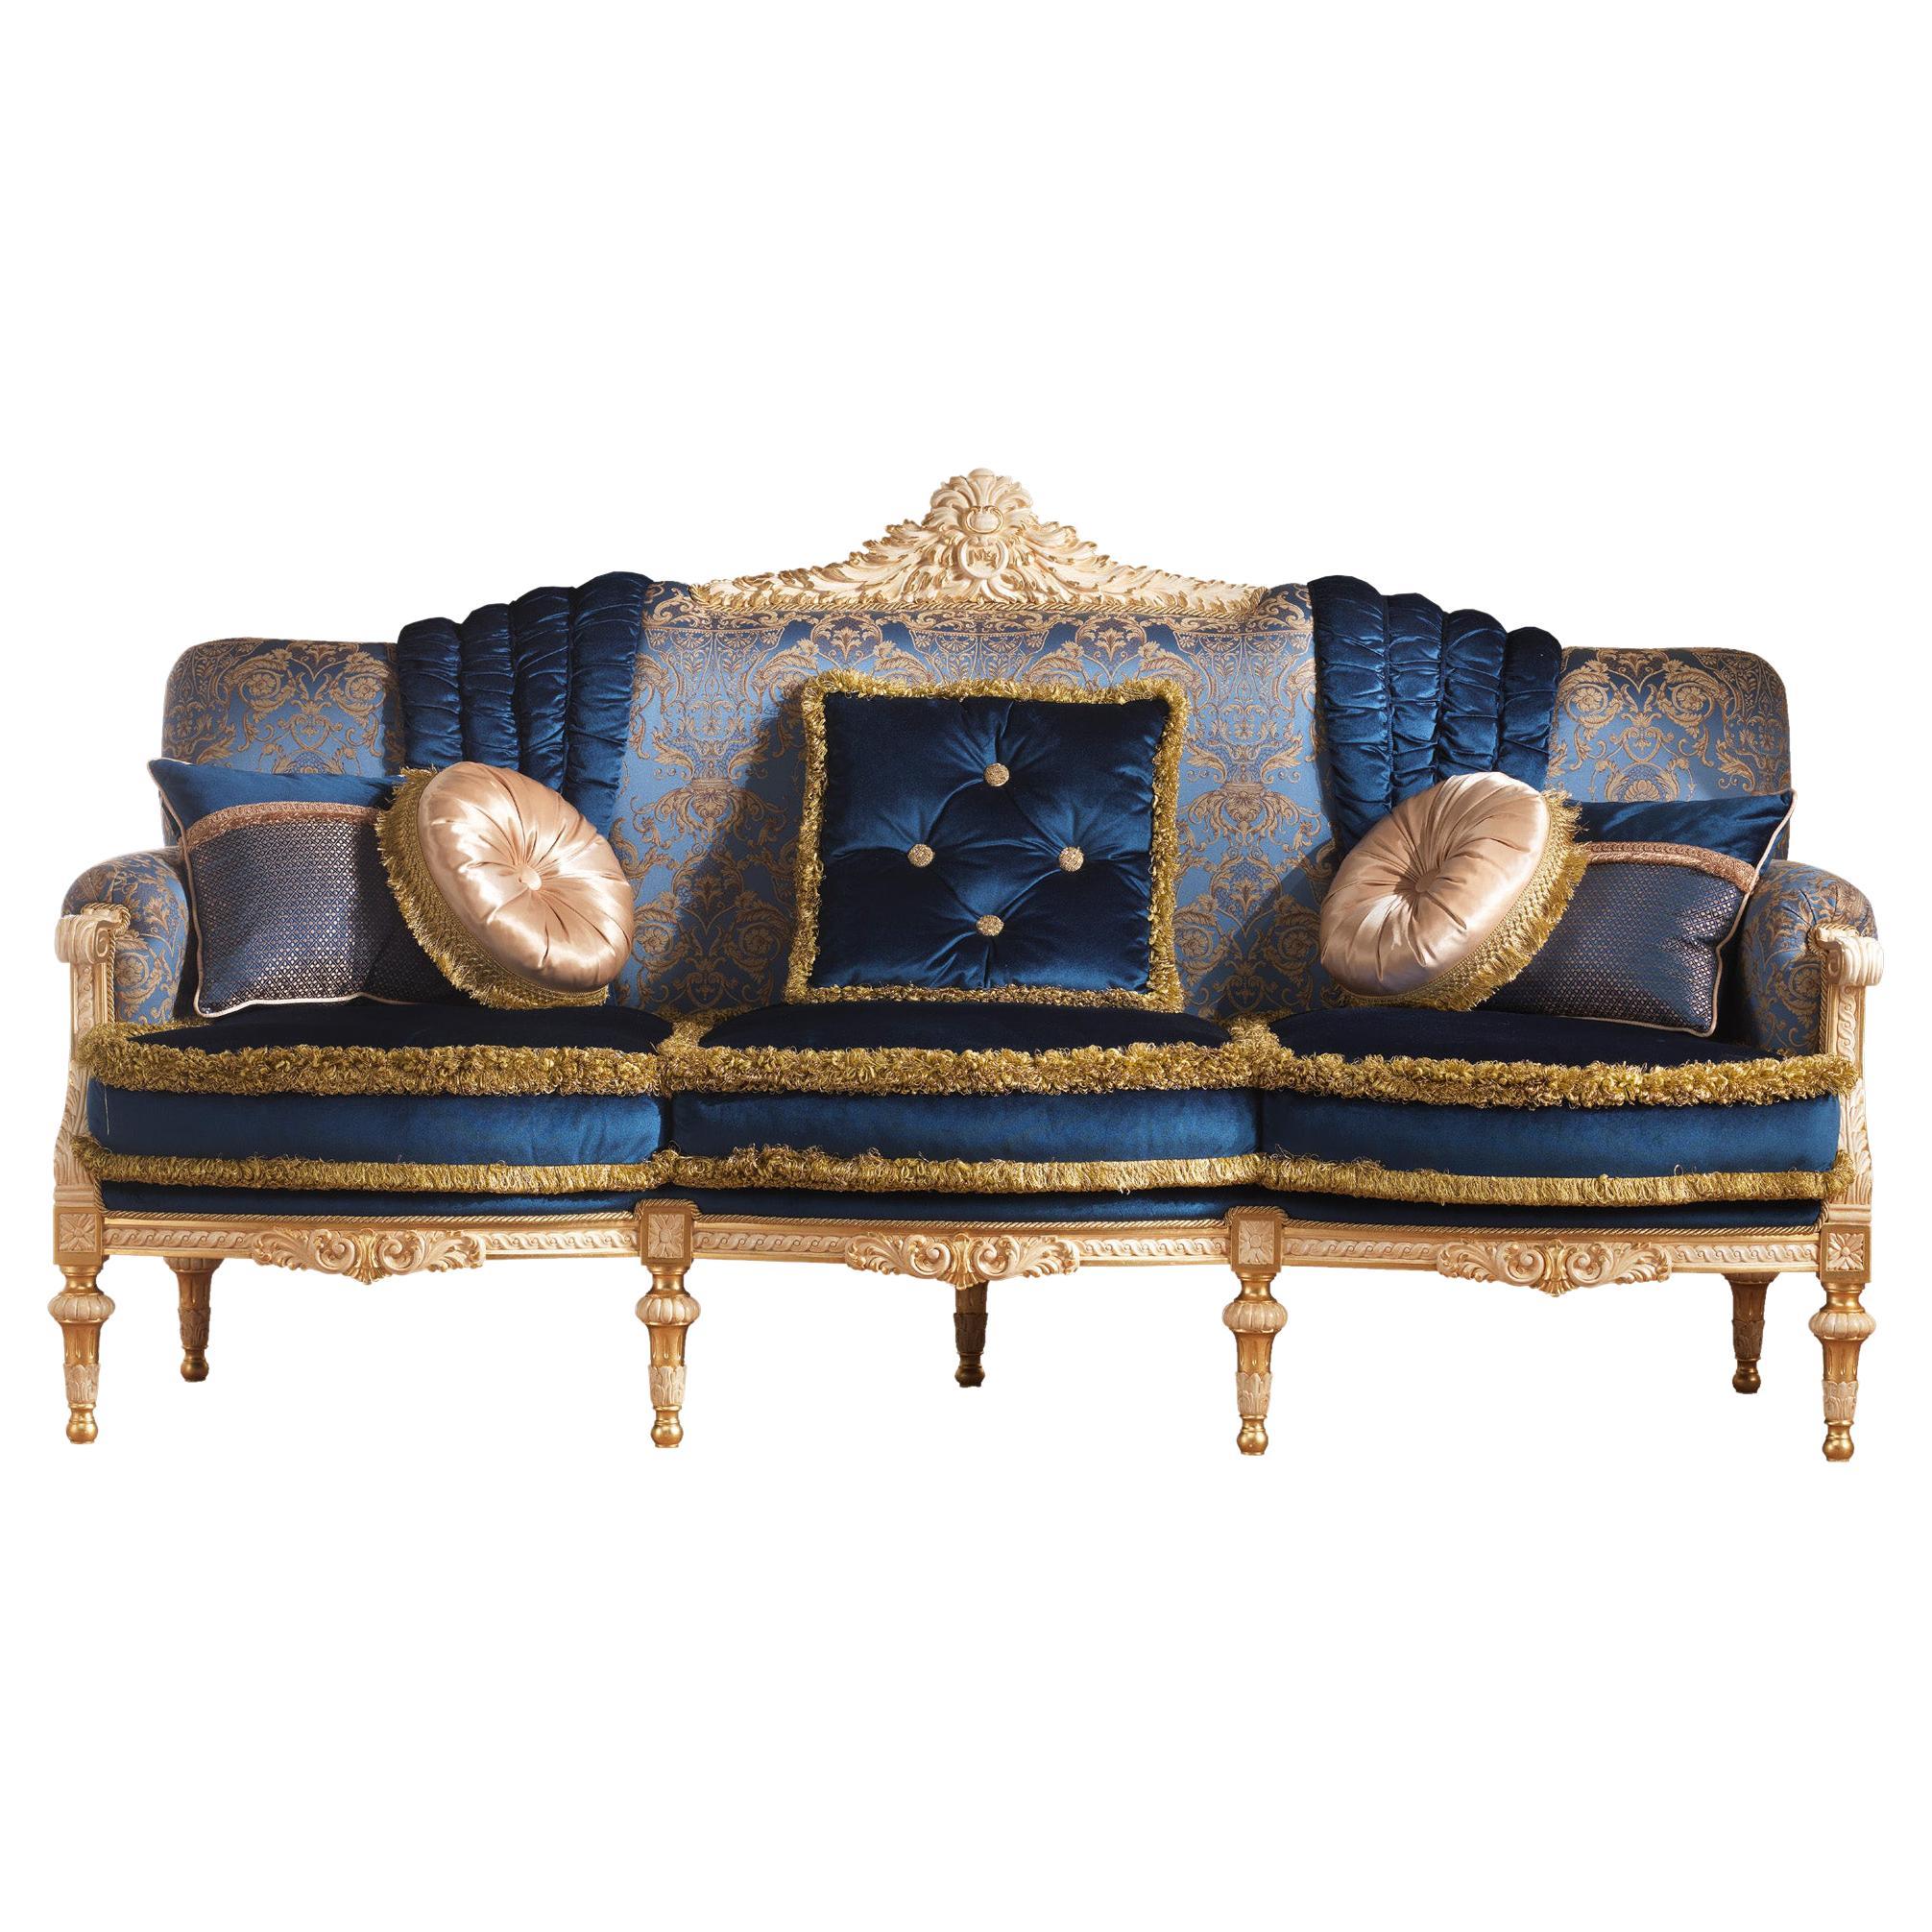 Noble Venetian Sofa in Massive Wood and Ivory Laquered with Gold Leaf Details For Sale